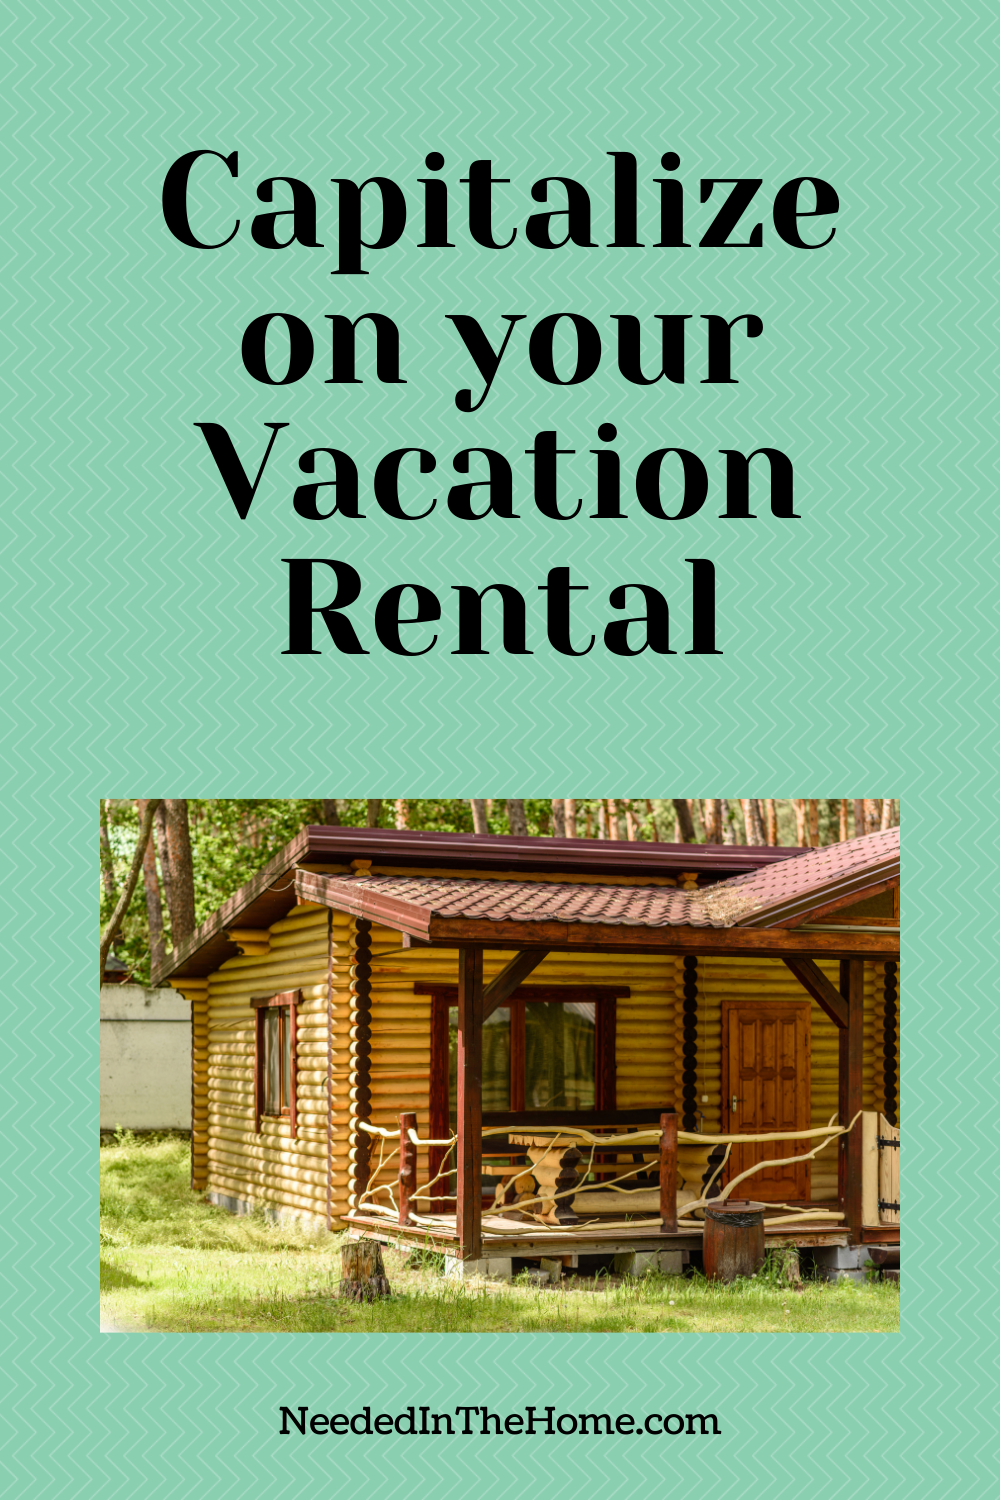 pinterest-pin-description capitalize on your vacation rental cabin neededinthehome